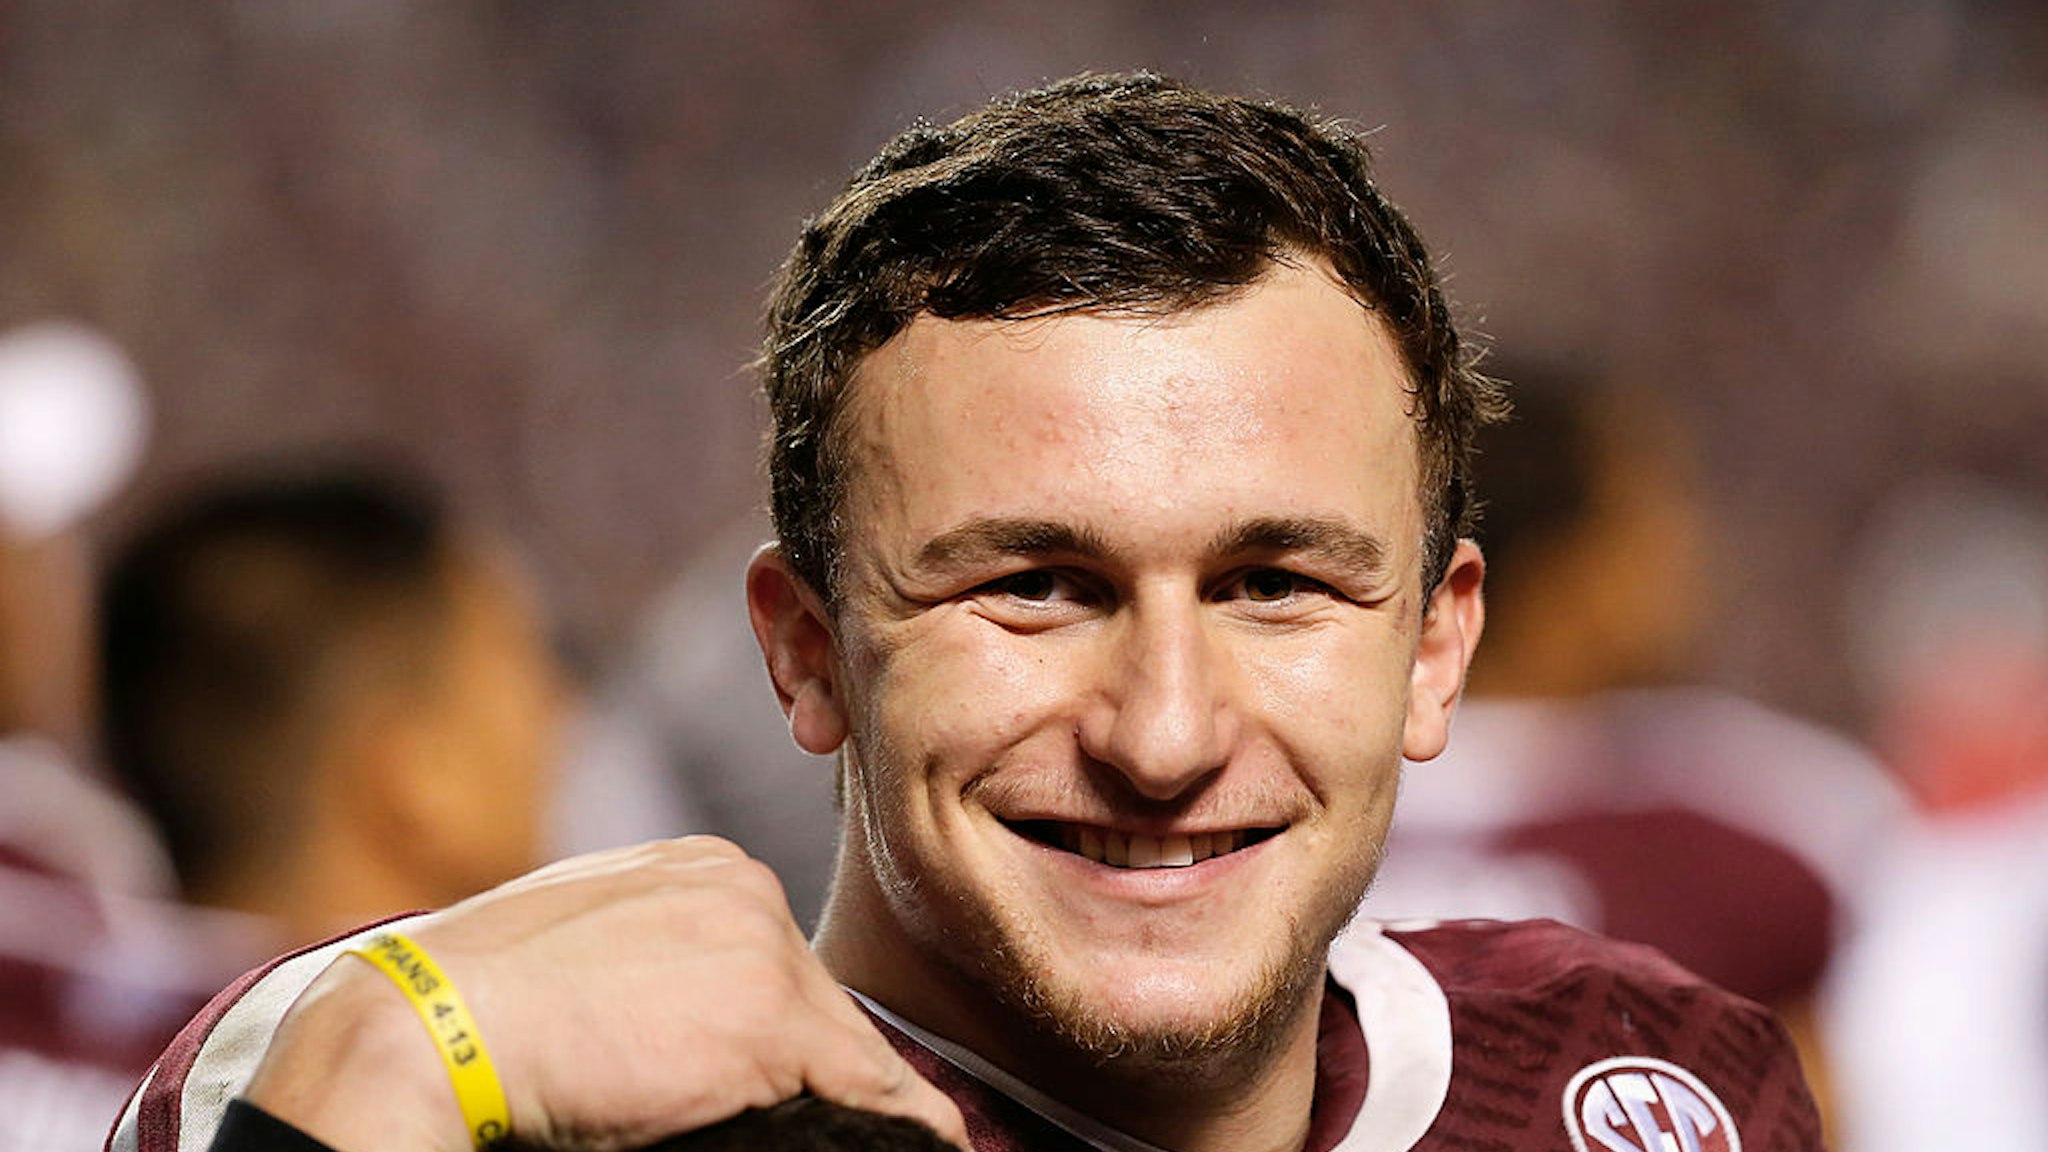 COLLEGE STATION, TX - NOVEMBER 09: Johnny Manziel #2 of the Texas A&amp;M Aggies waits near the bench late in the fourth quarter during the game against the Mississippi State Bulldogs at Kyle Field on November 9, 2013 in College Station, Texas. (Photo by Scott Halleran/Getty Images)